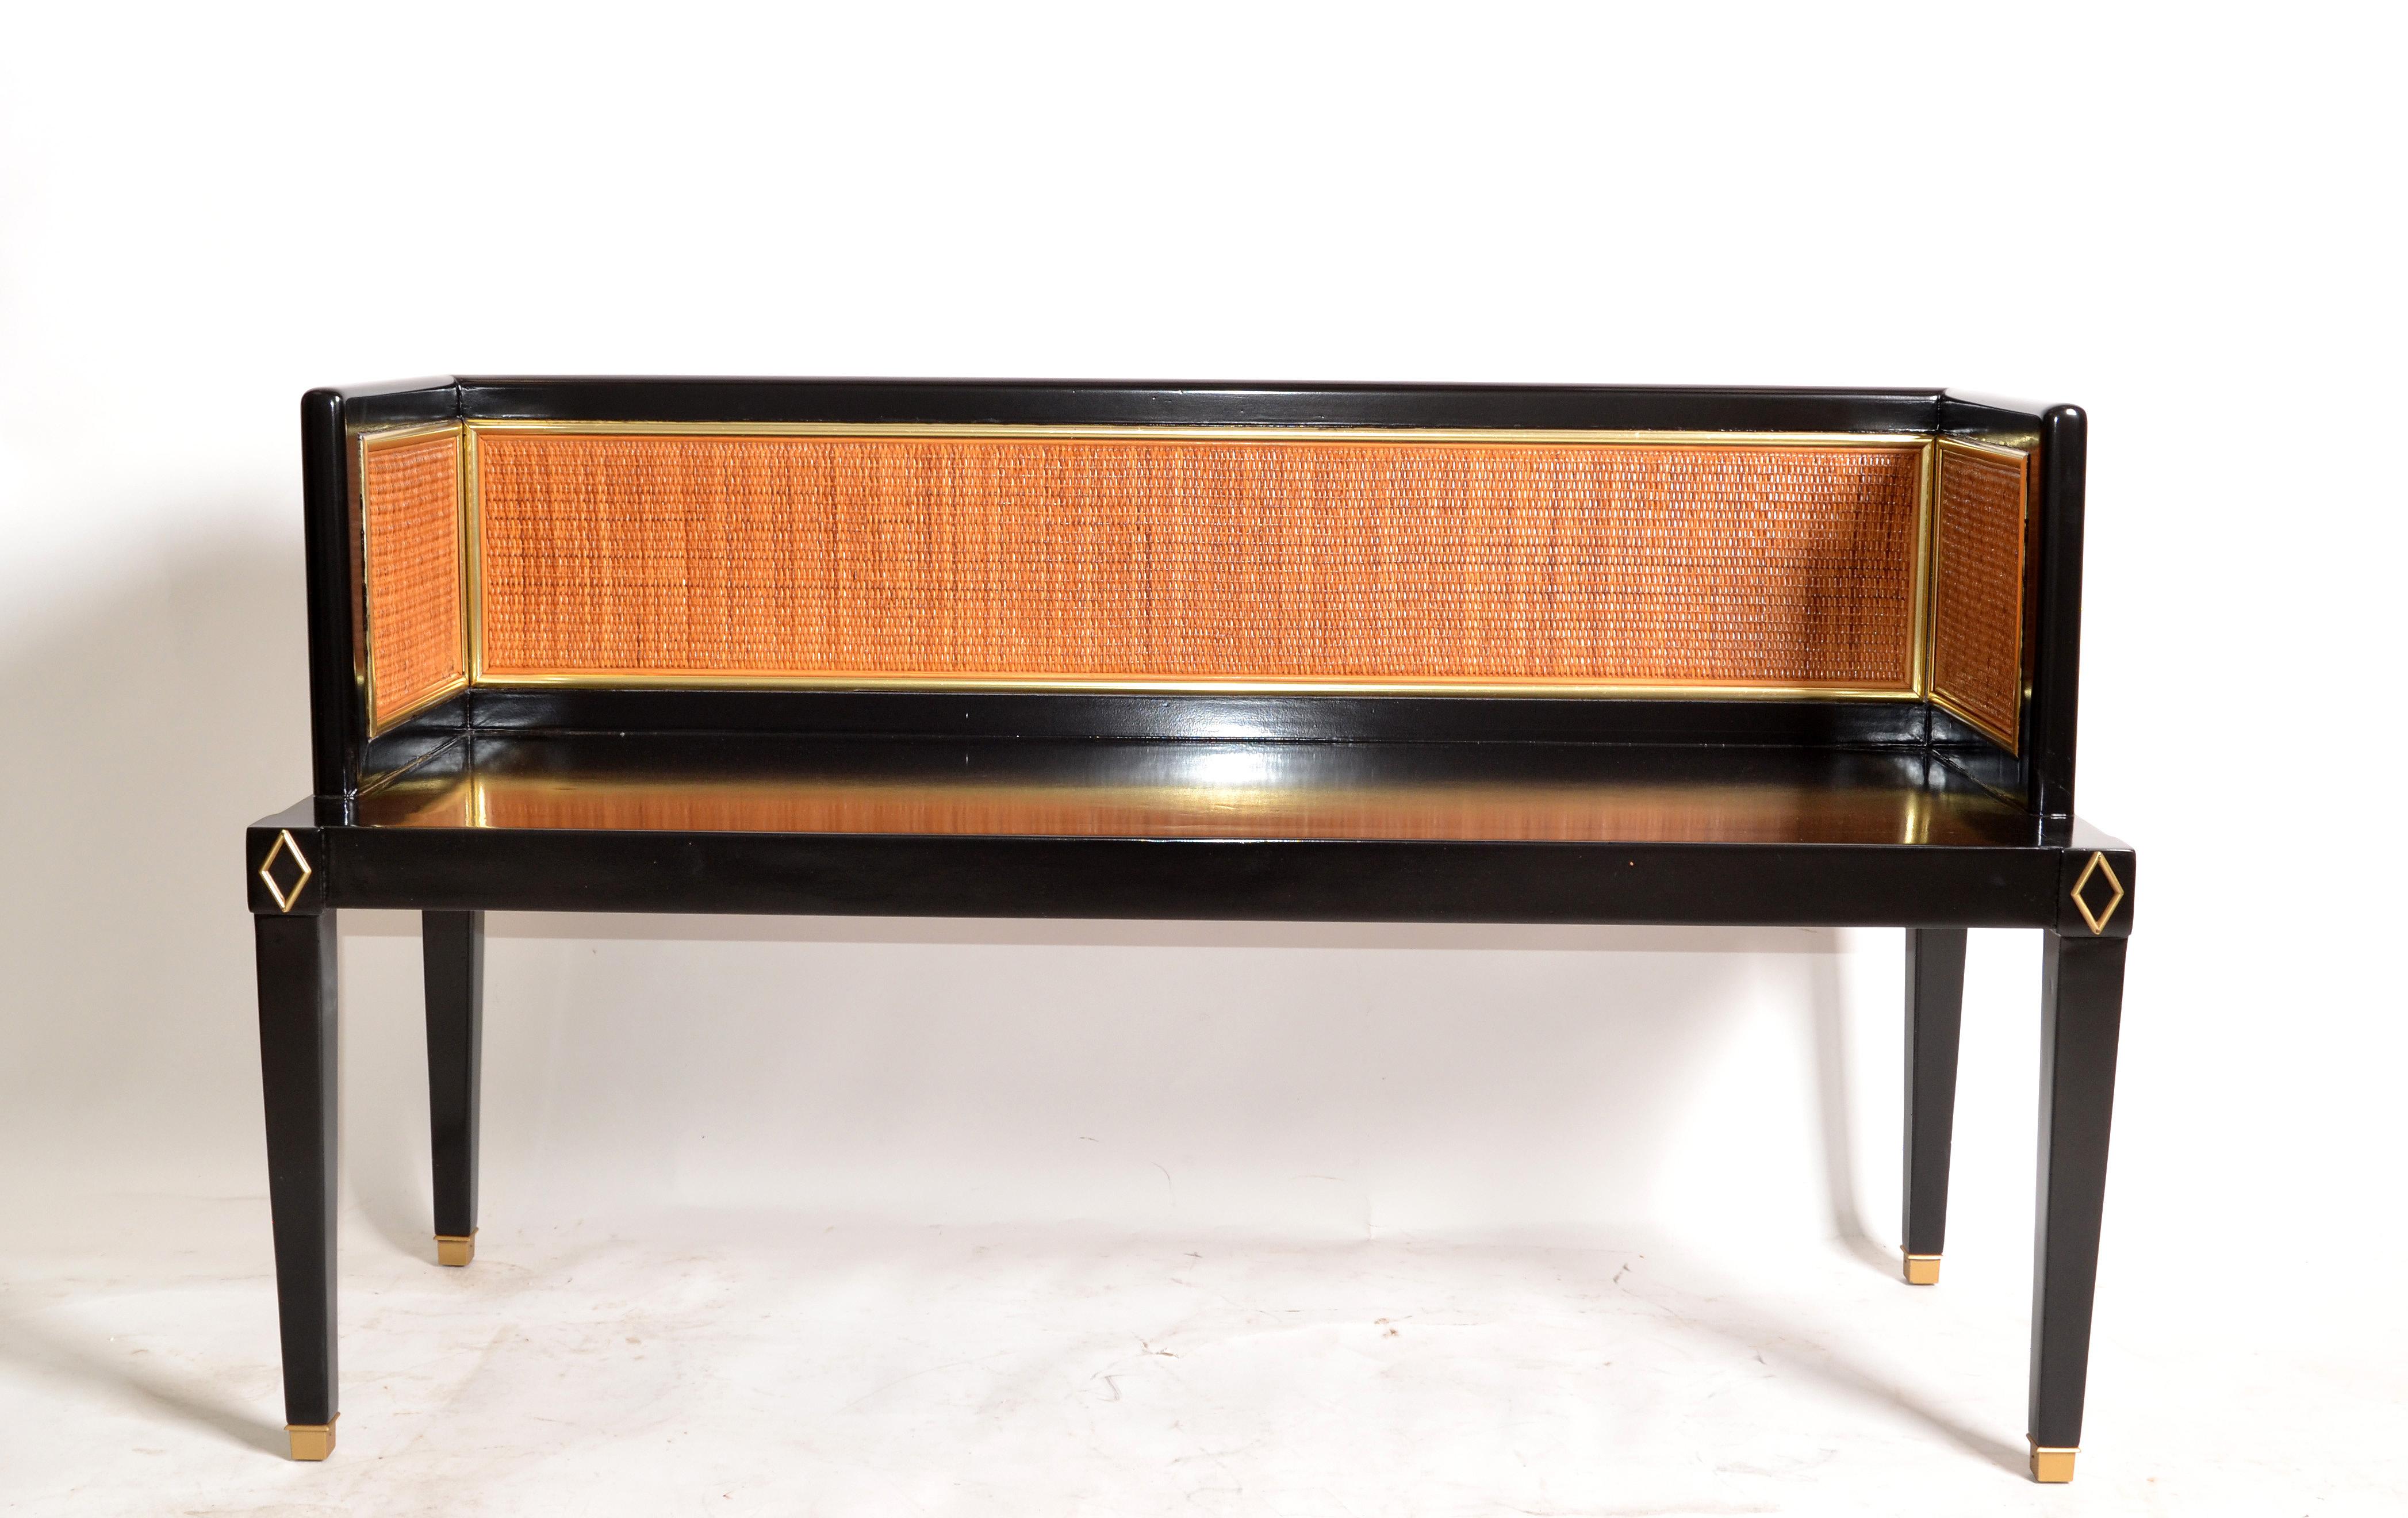 Black Lacquered Wood, Brass & Cane Seating Bench Mid-Century Modern Asian Style In Good Condition For Sale In Miami, FL